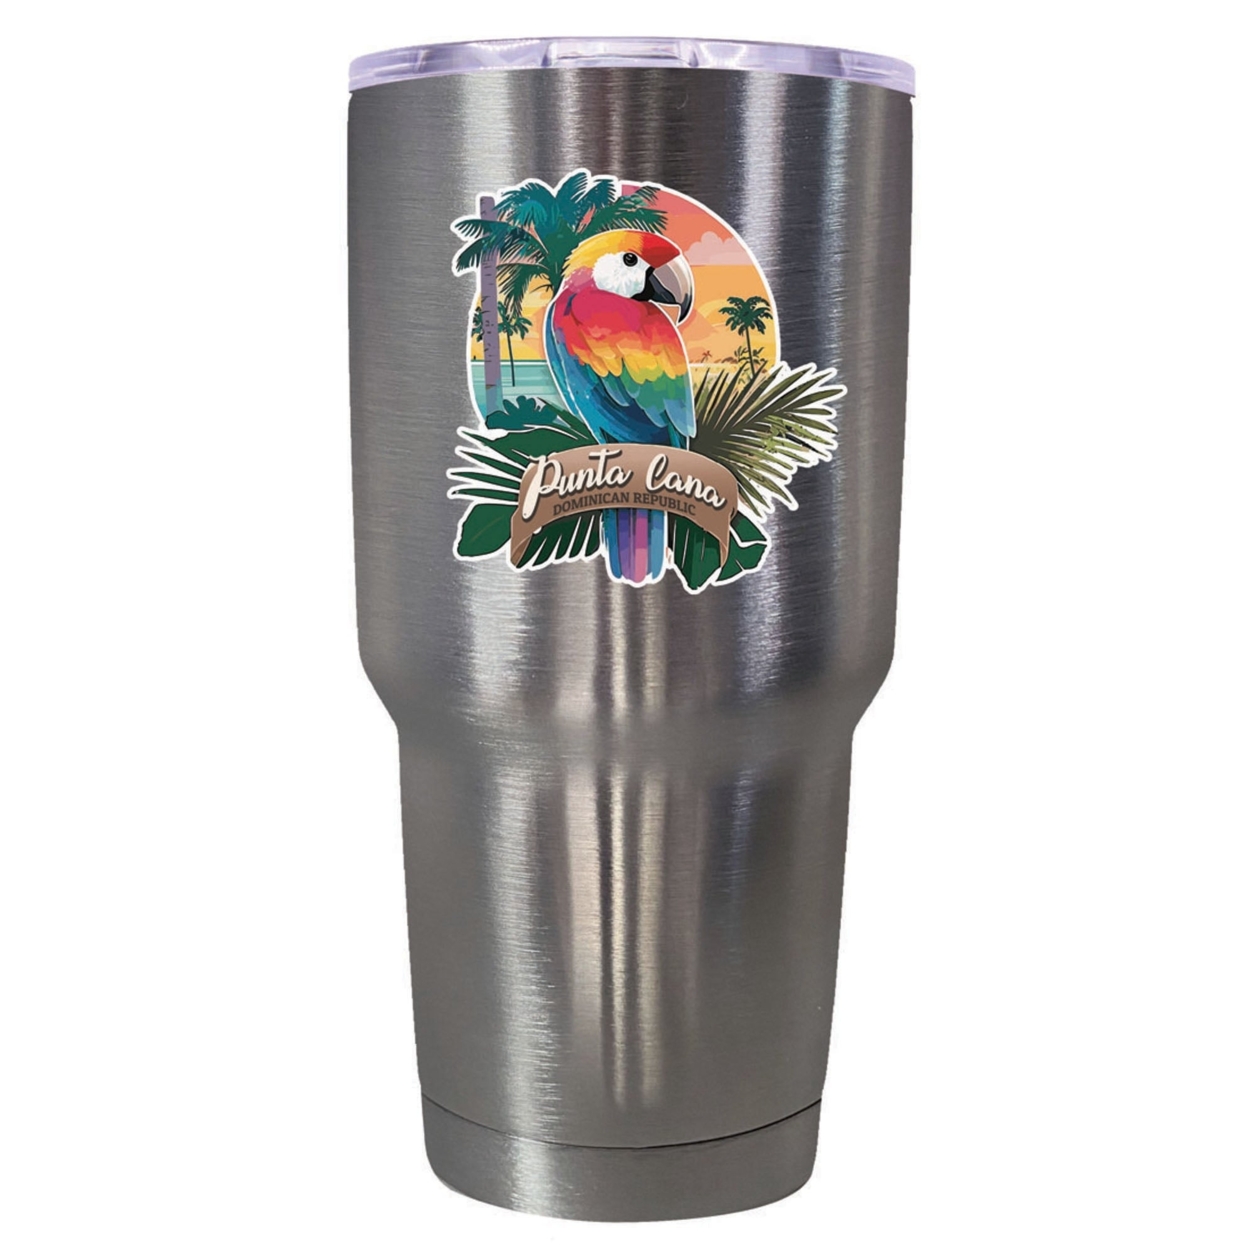 Punta Cana Dominican Republic Souvenir 24 Oz Insulated Stainless Steel Tumbler - Stainless Steel, PARROT